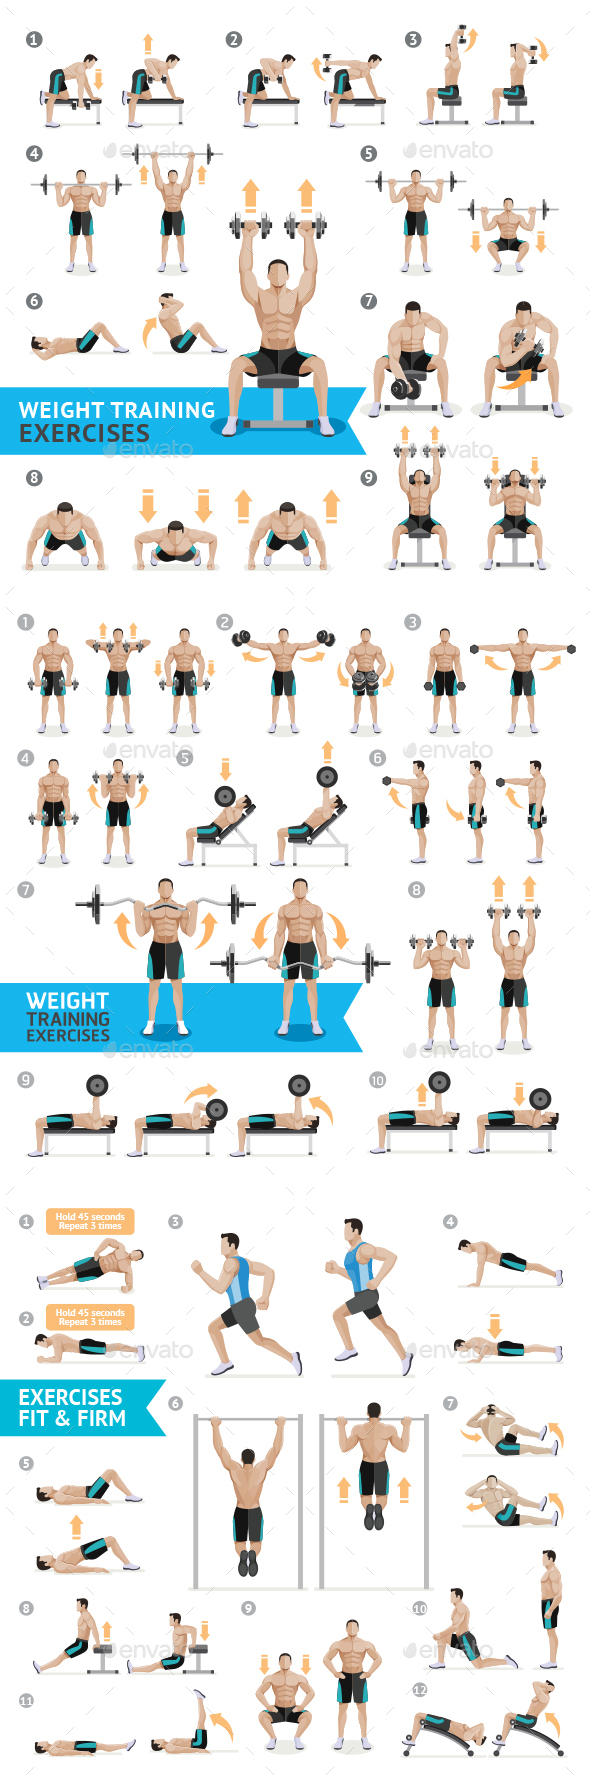 Dumbbell Exercises and Workouts Weight Training